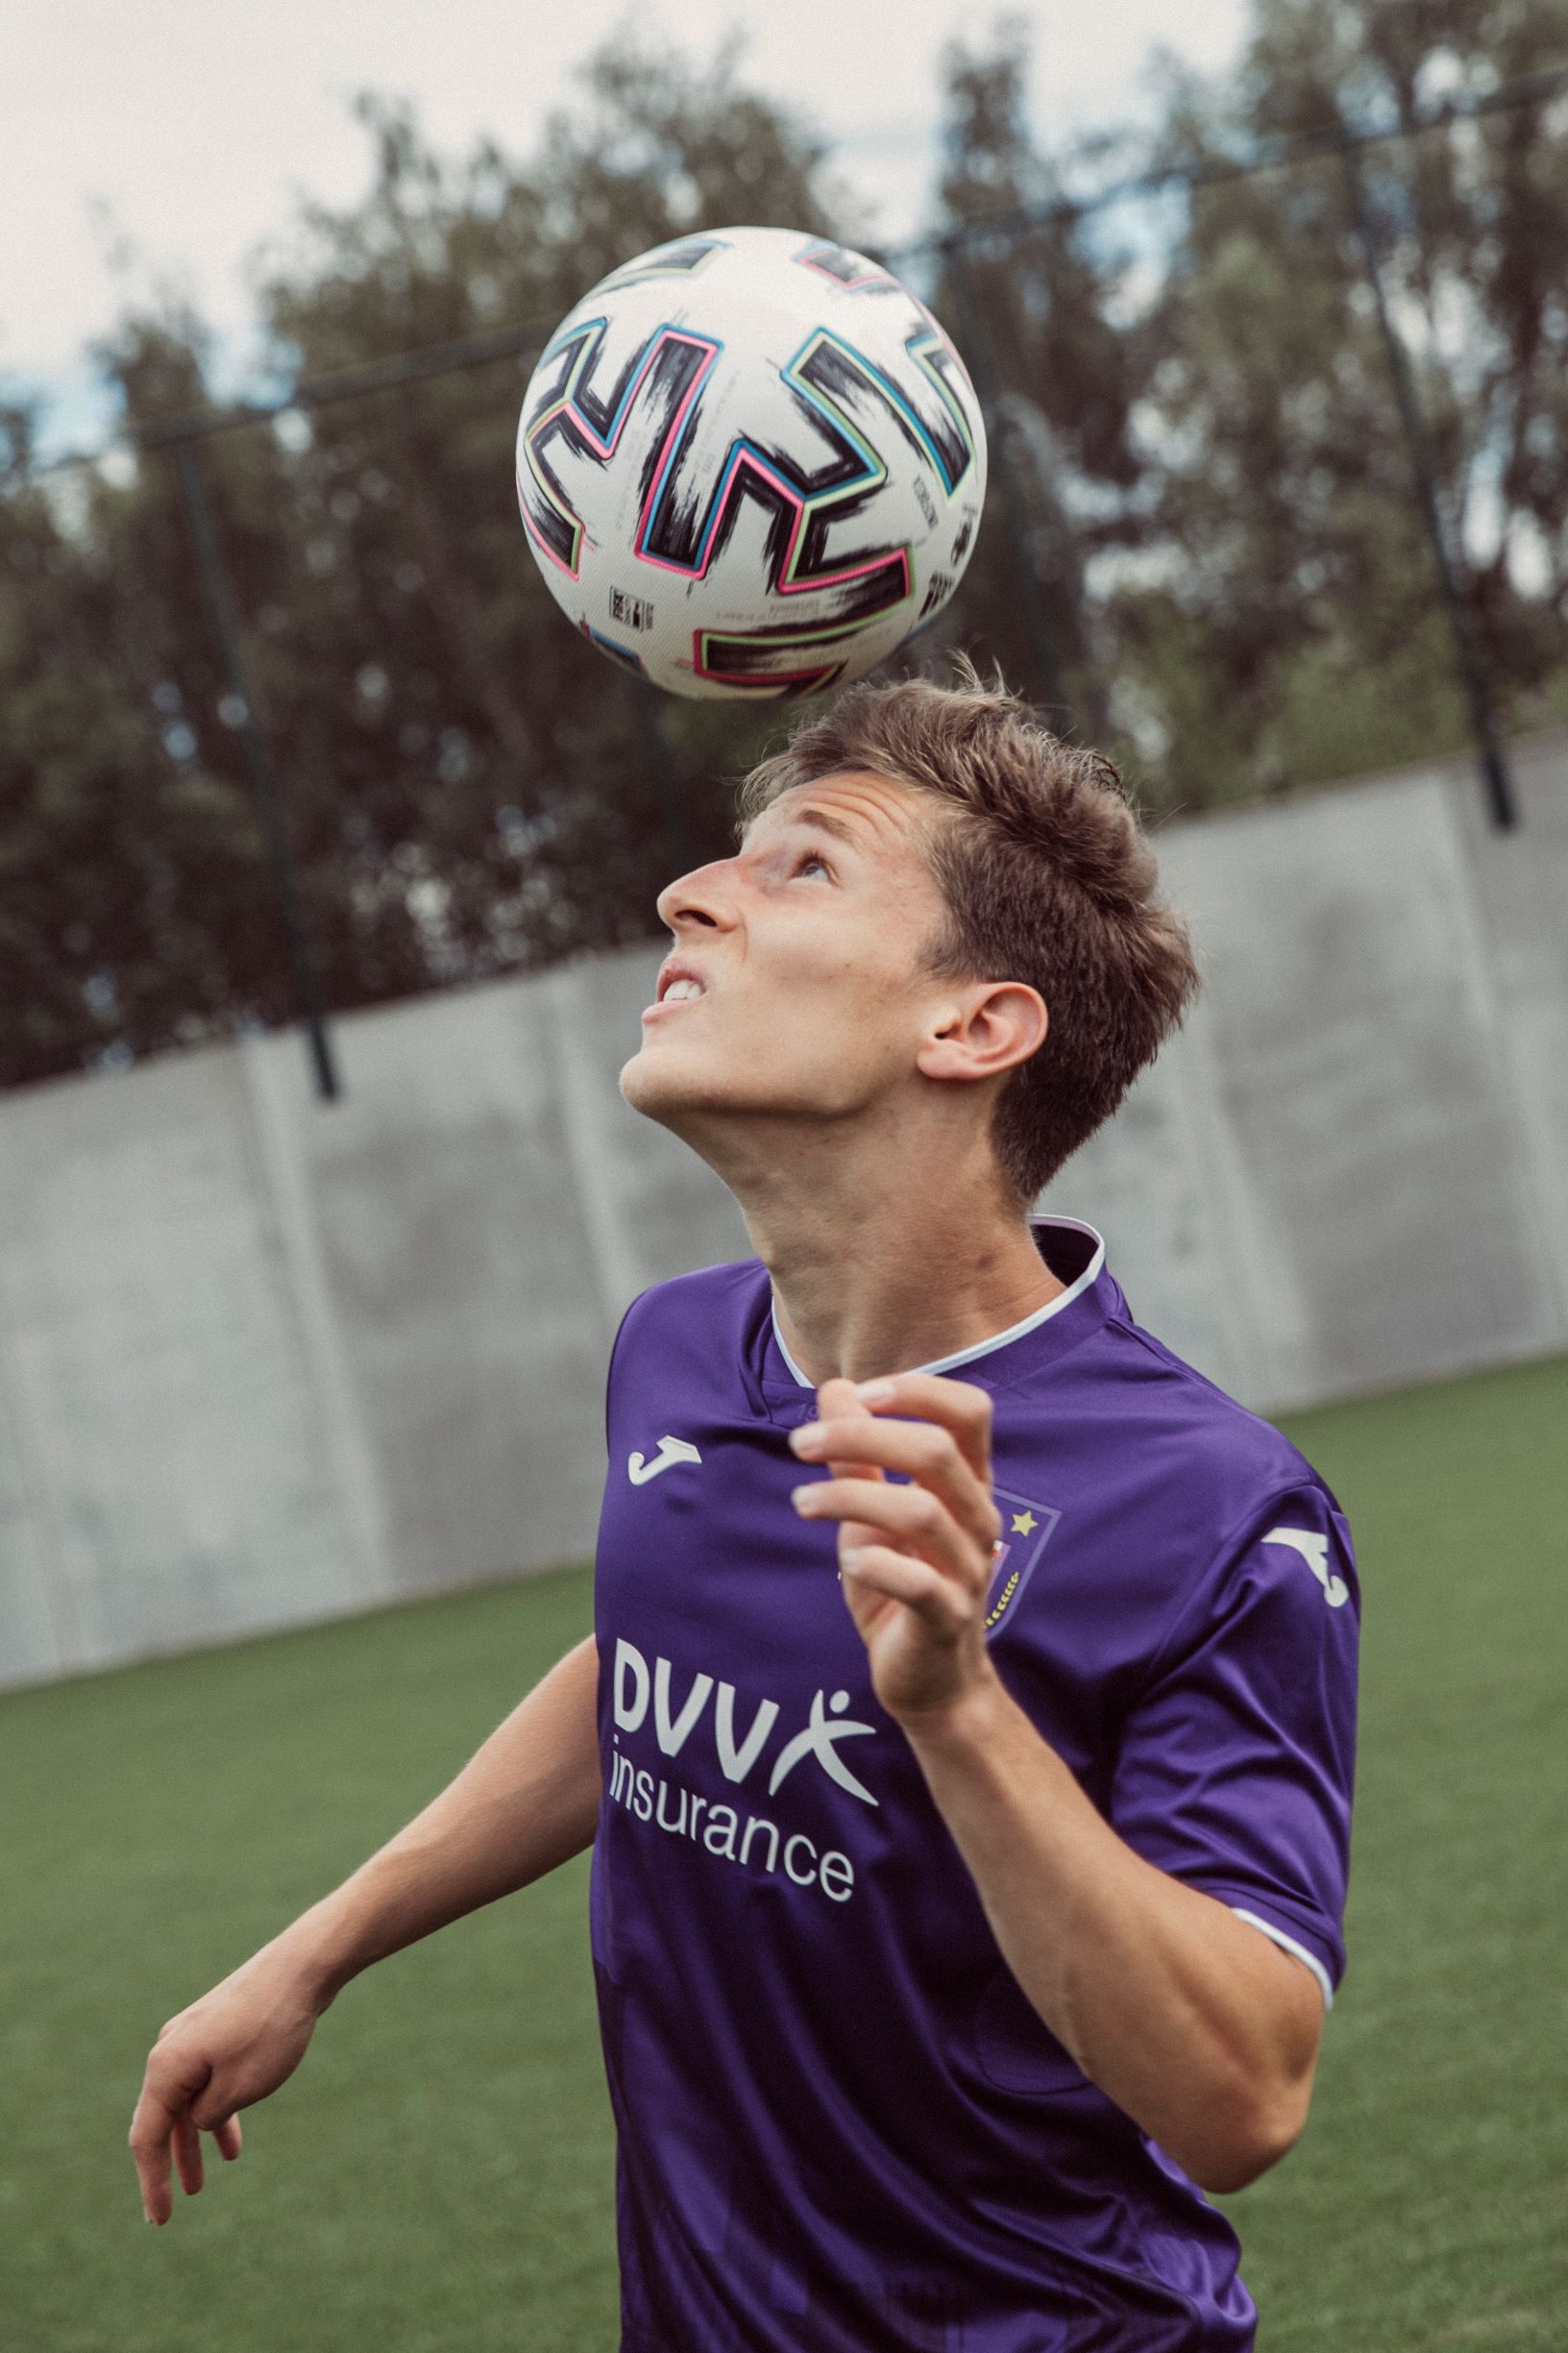 RSCA Home Jersey 2020/2021 is-hover